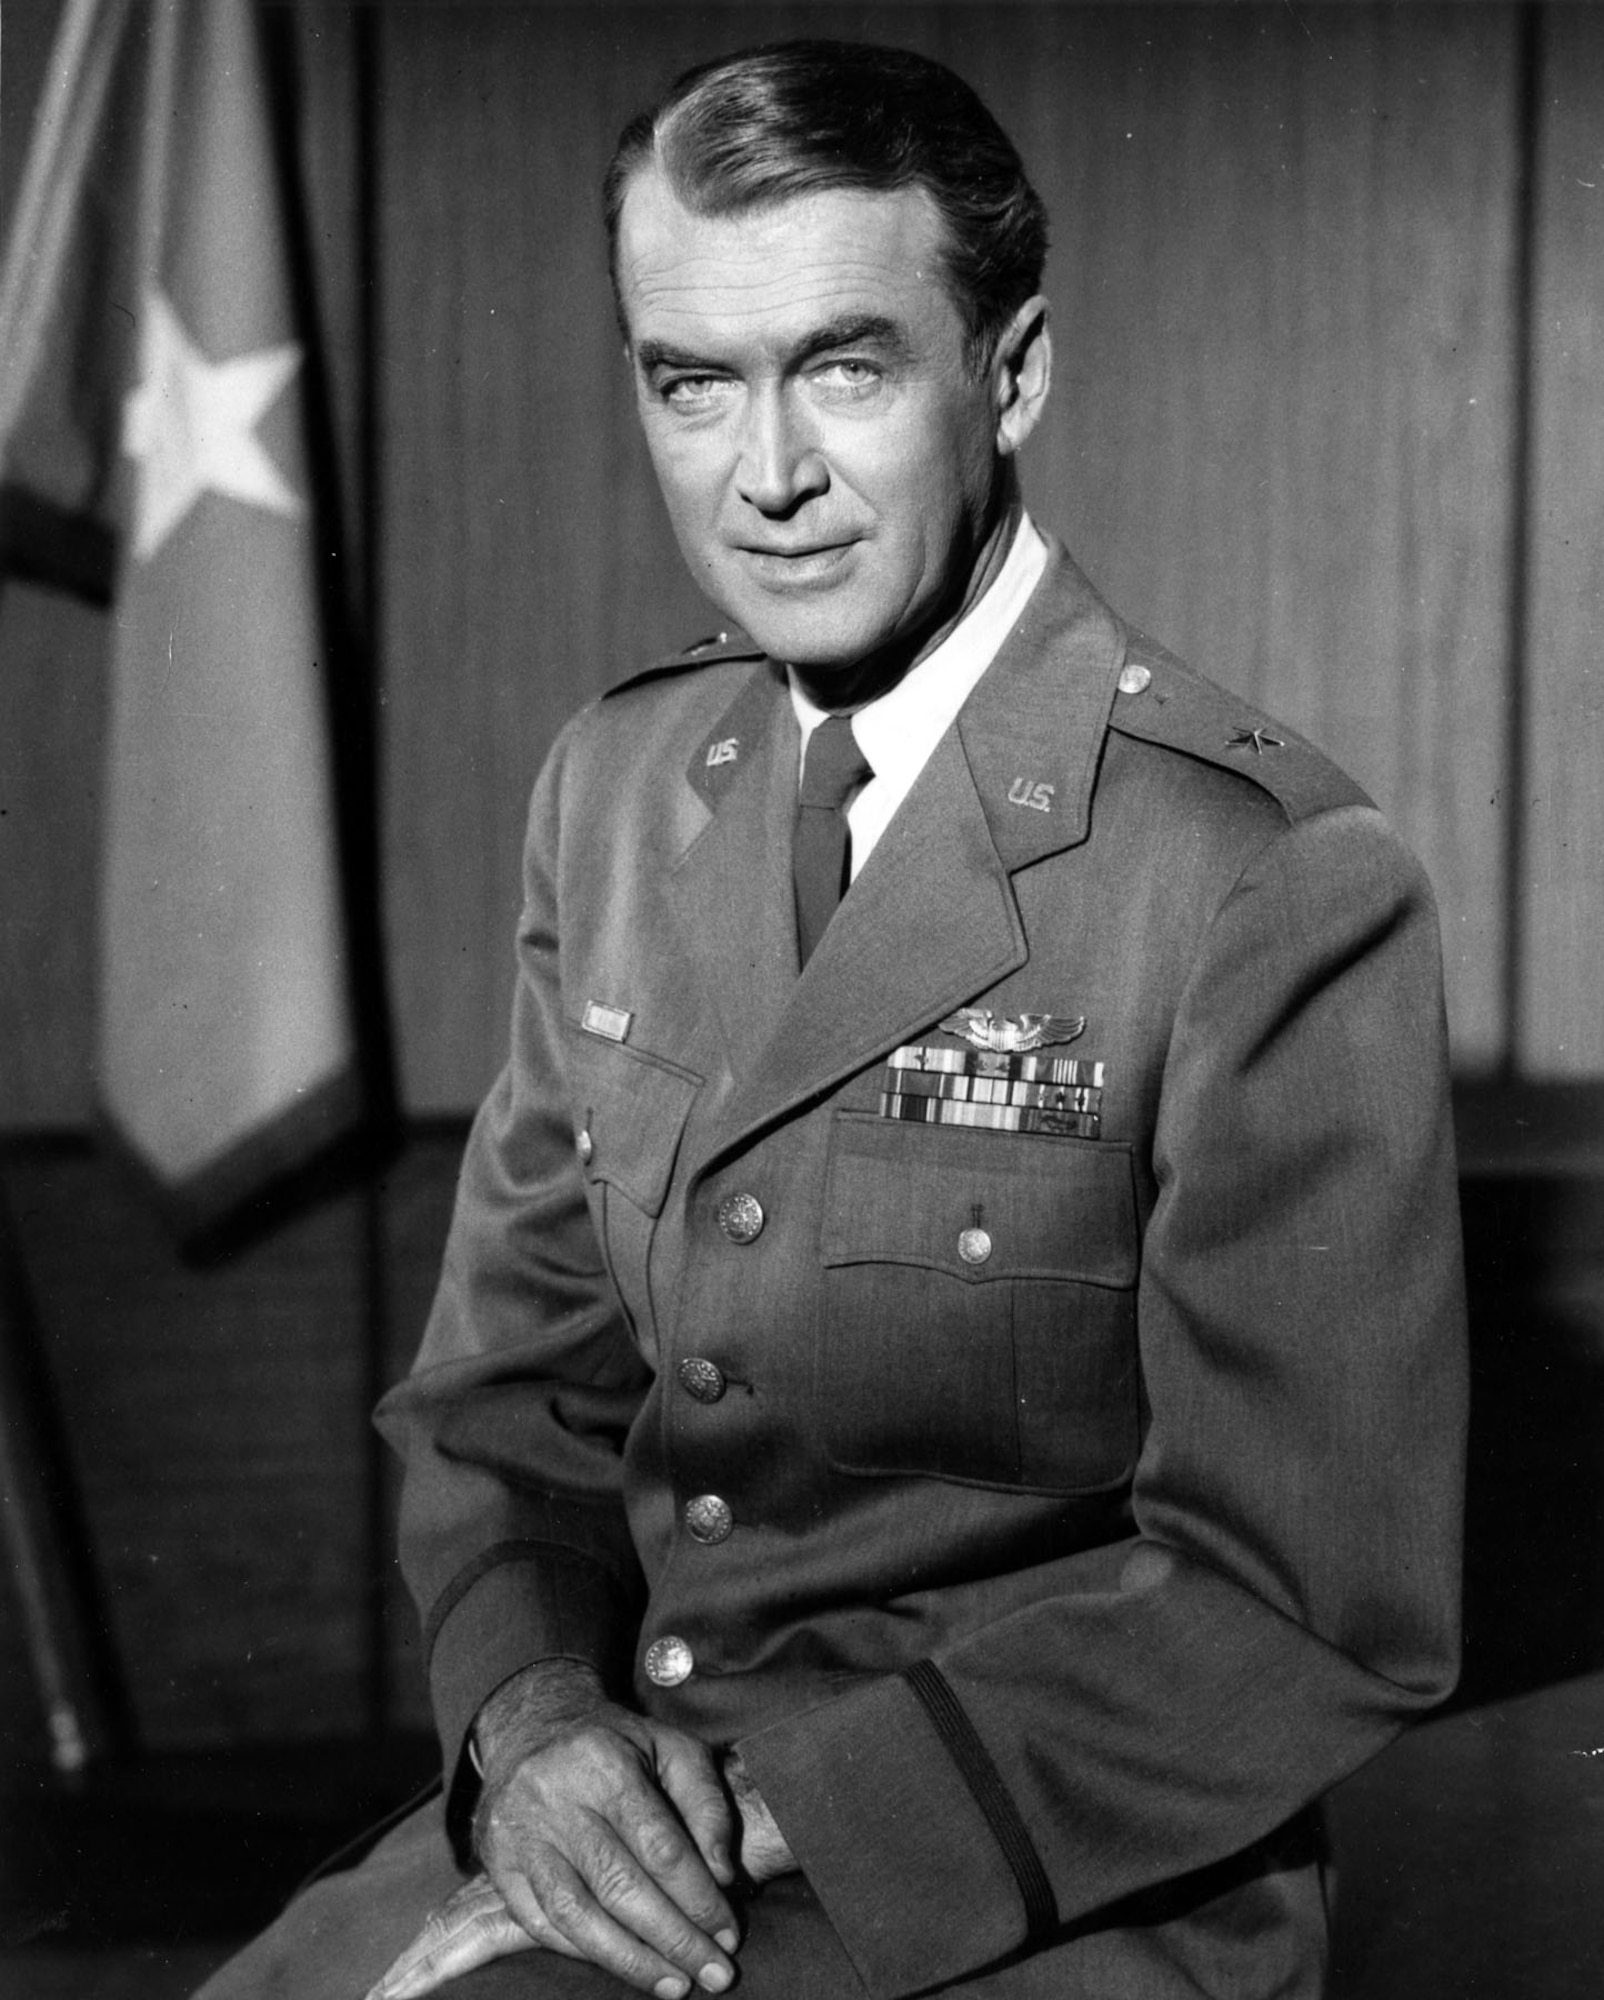 After leaving active duty in 1945, actor Jimmy Stewart remained active with the Air Force Reserve, rising to the rank of brigadier general.